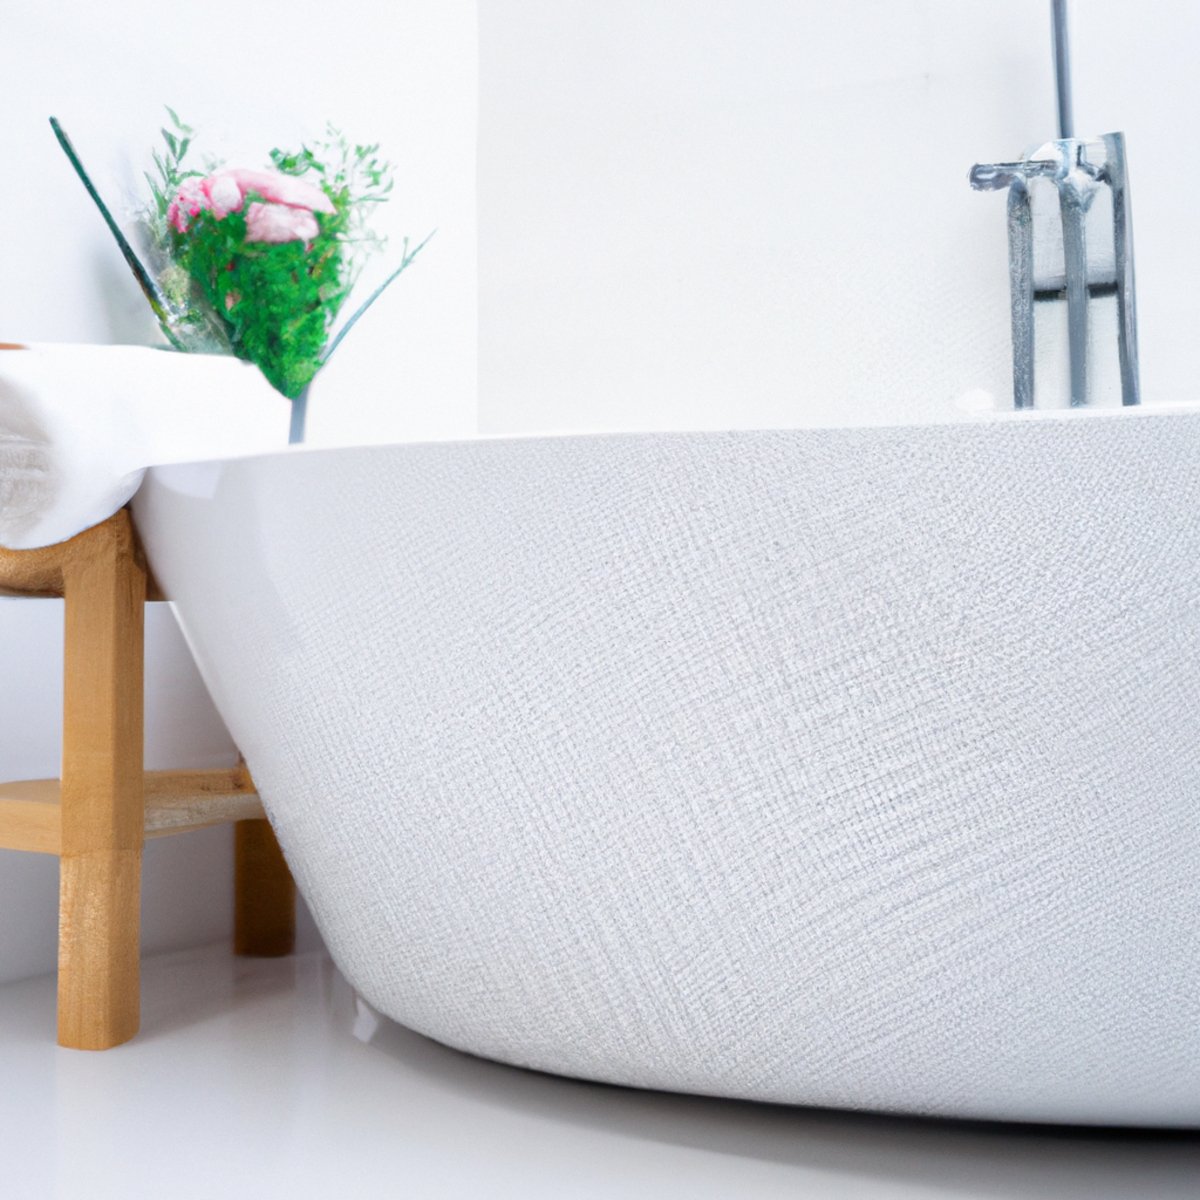 Serenity and relaxation in a modern bathroom with sleek bathtub, plush towel, bath caddy, and soothing ambiance- Self-care Products